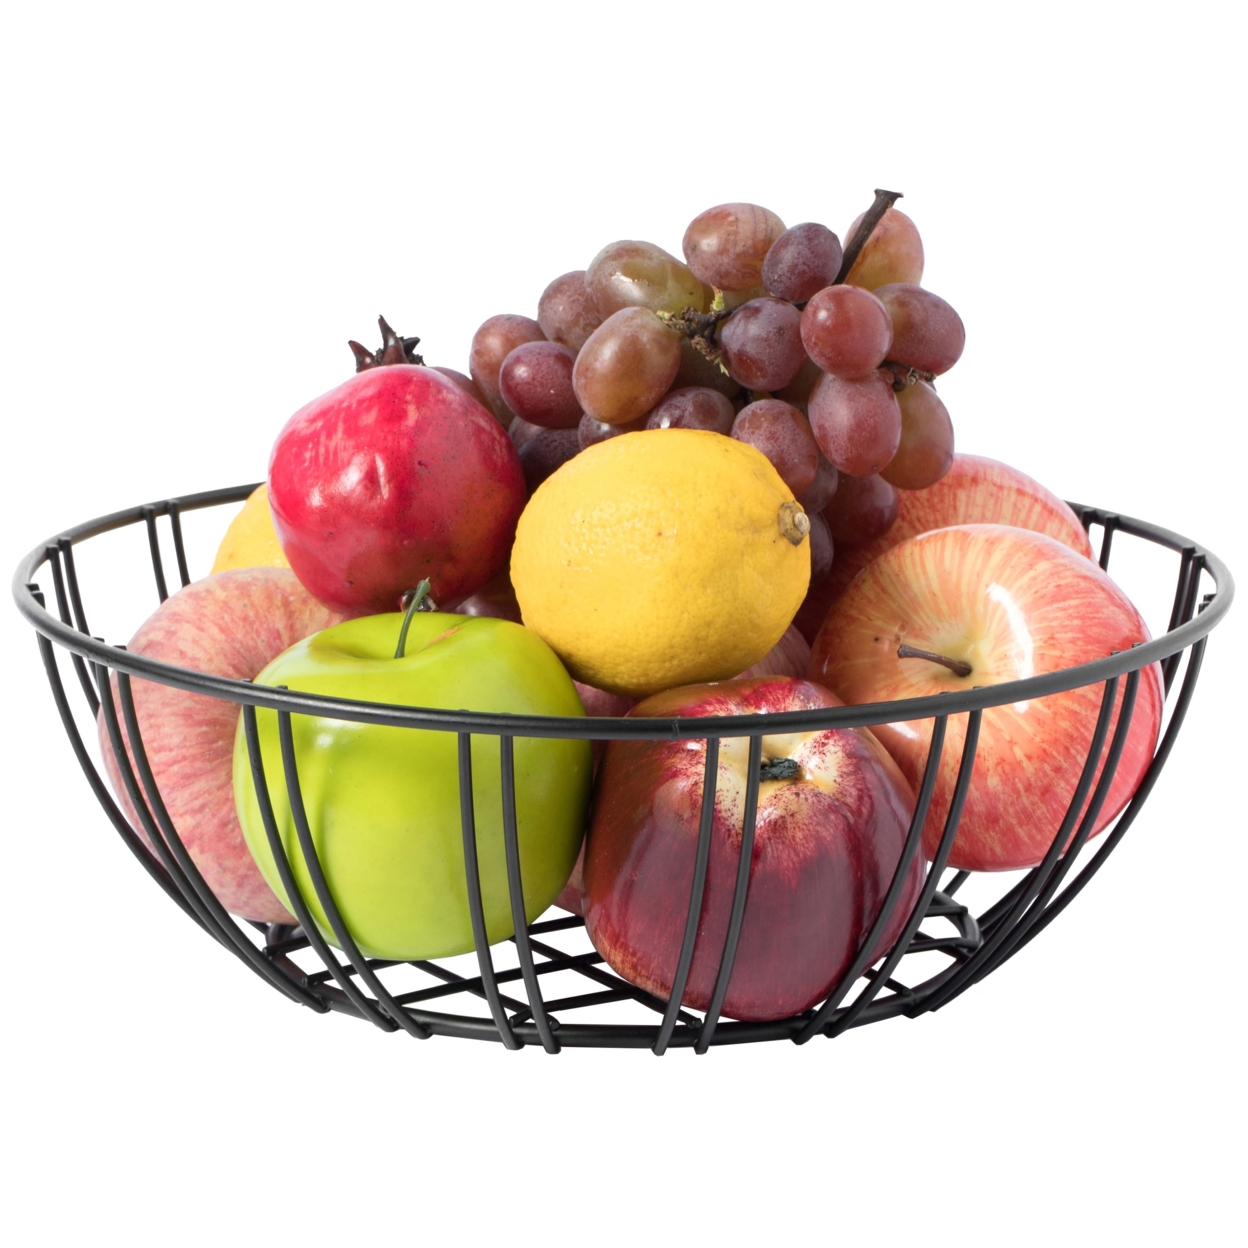 Black Iron Wire Fruit Bowl For Kitchen Counter, Storage Basket For Fruits, Vegetables, And Bread - Single